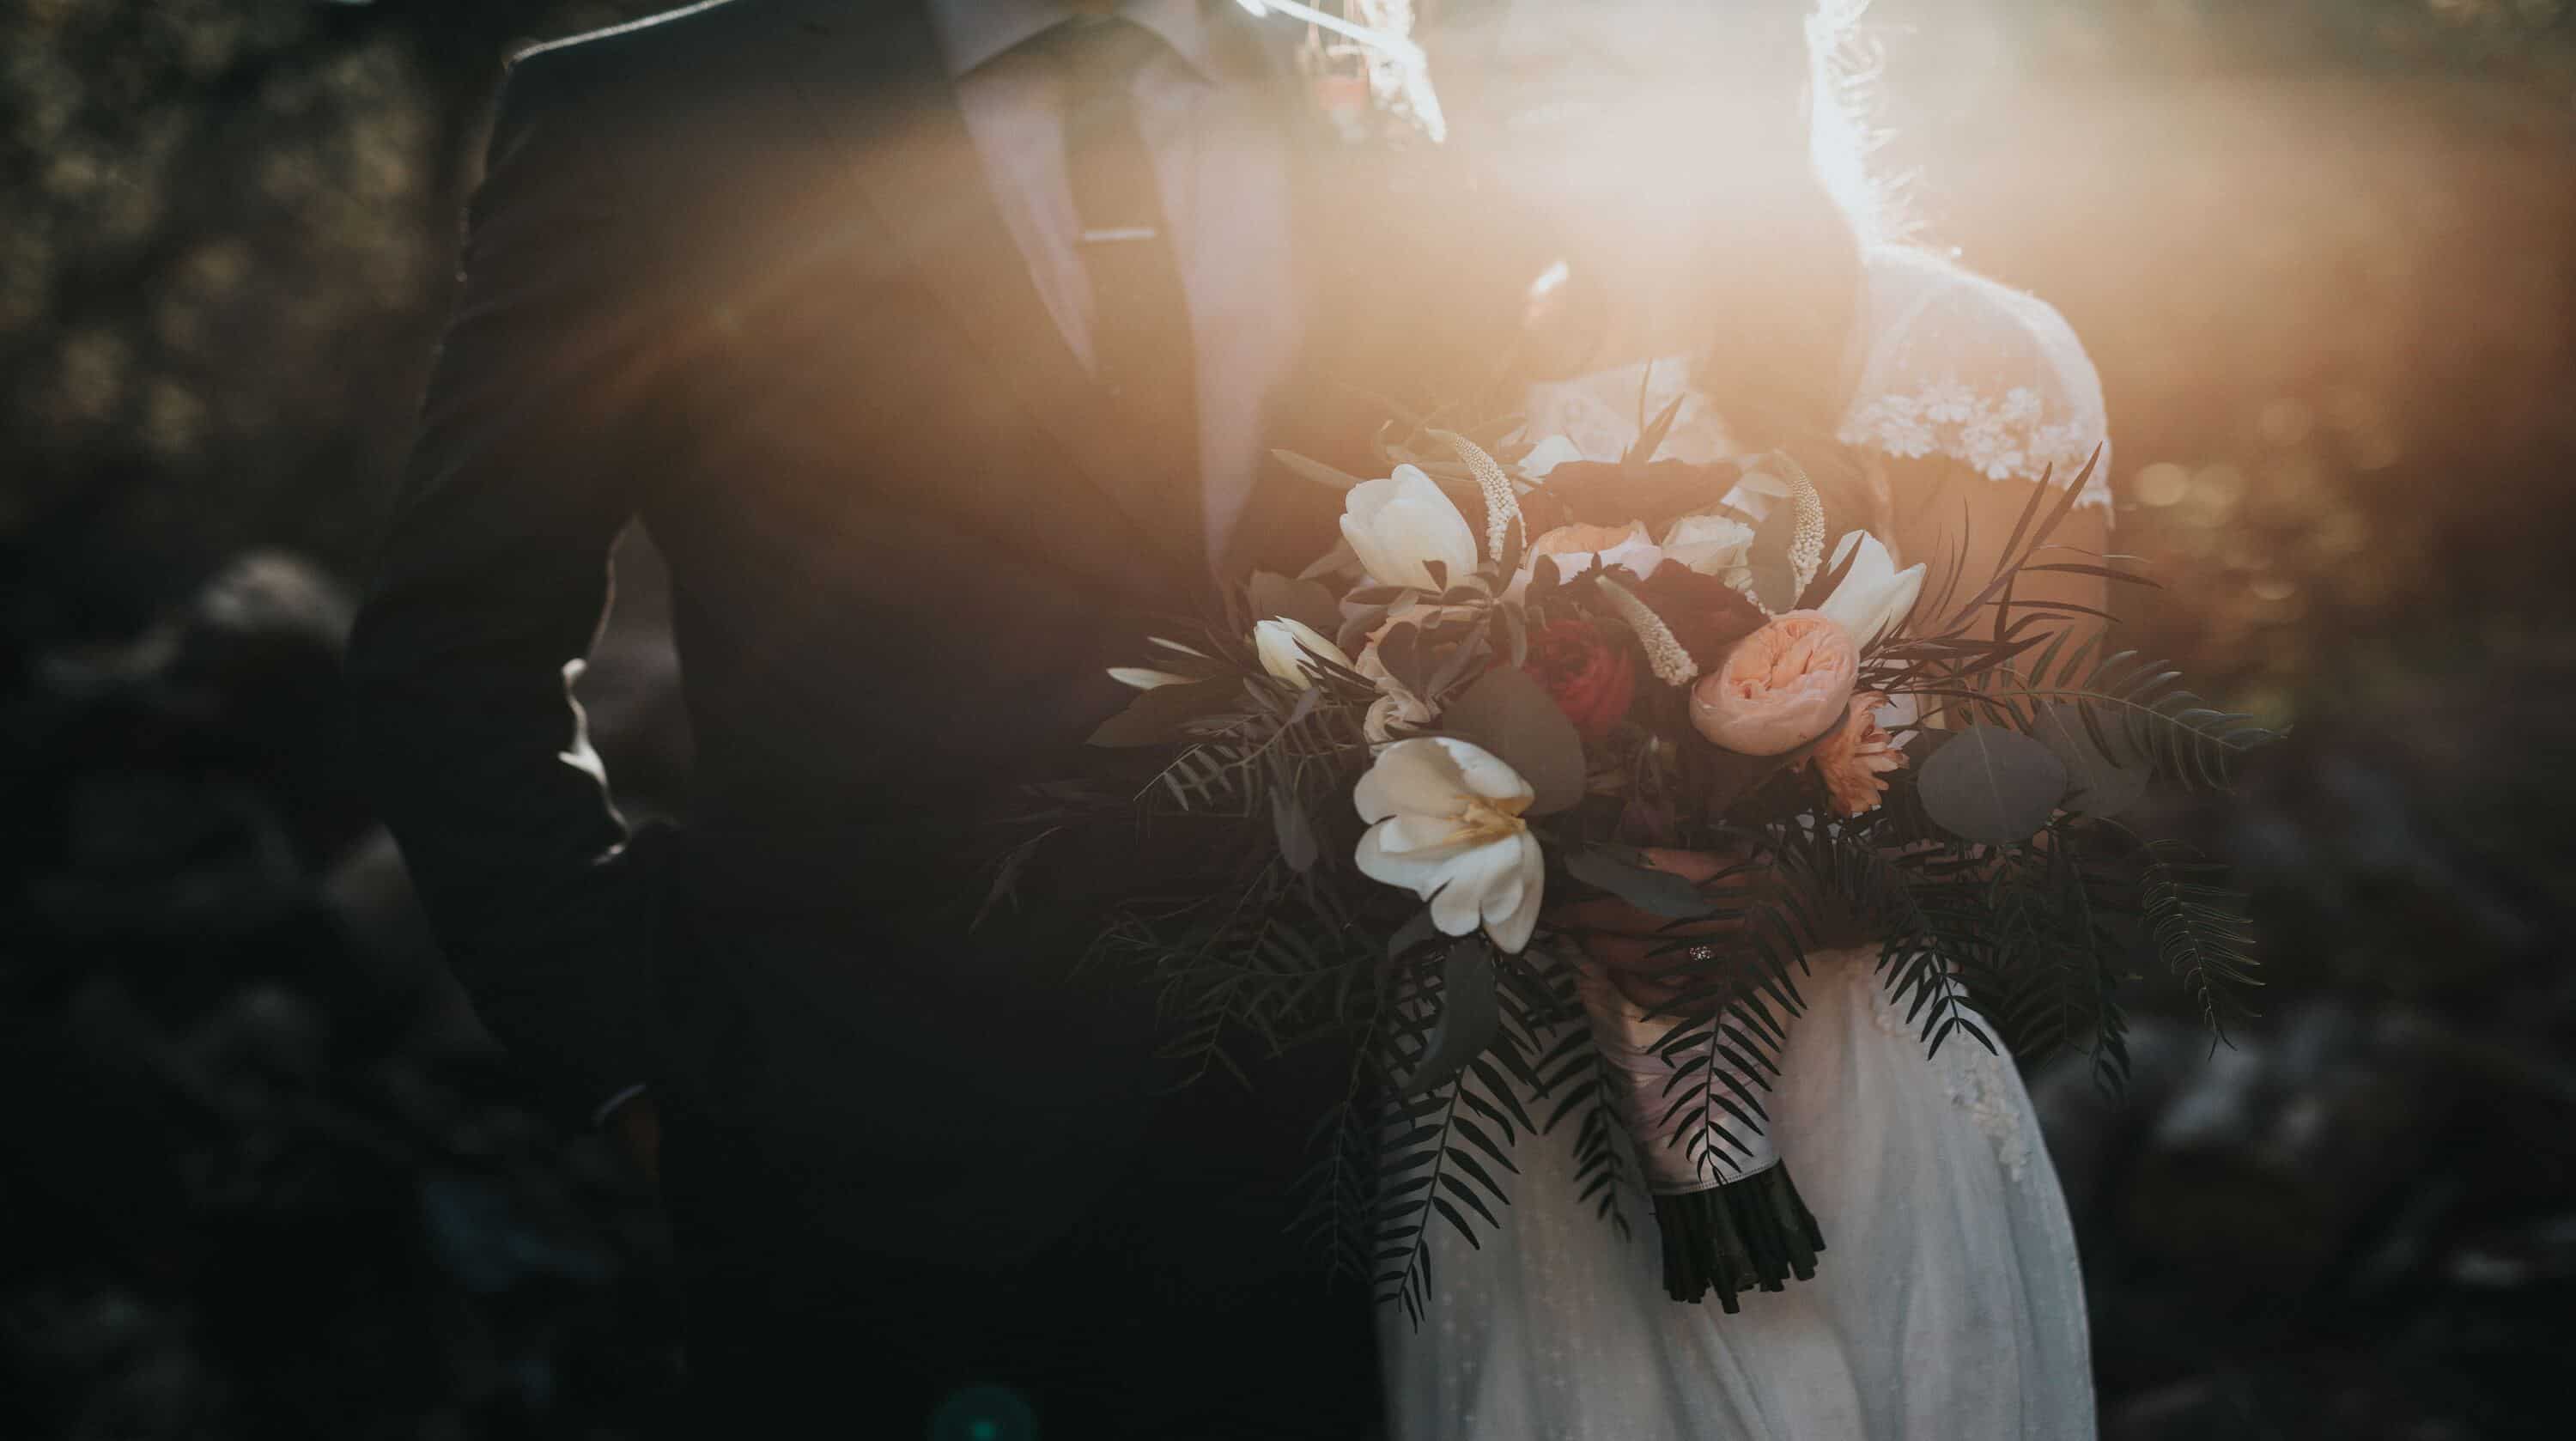 A couple is dressed for a wedding and the bride is holding a bouquet.